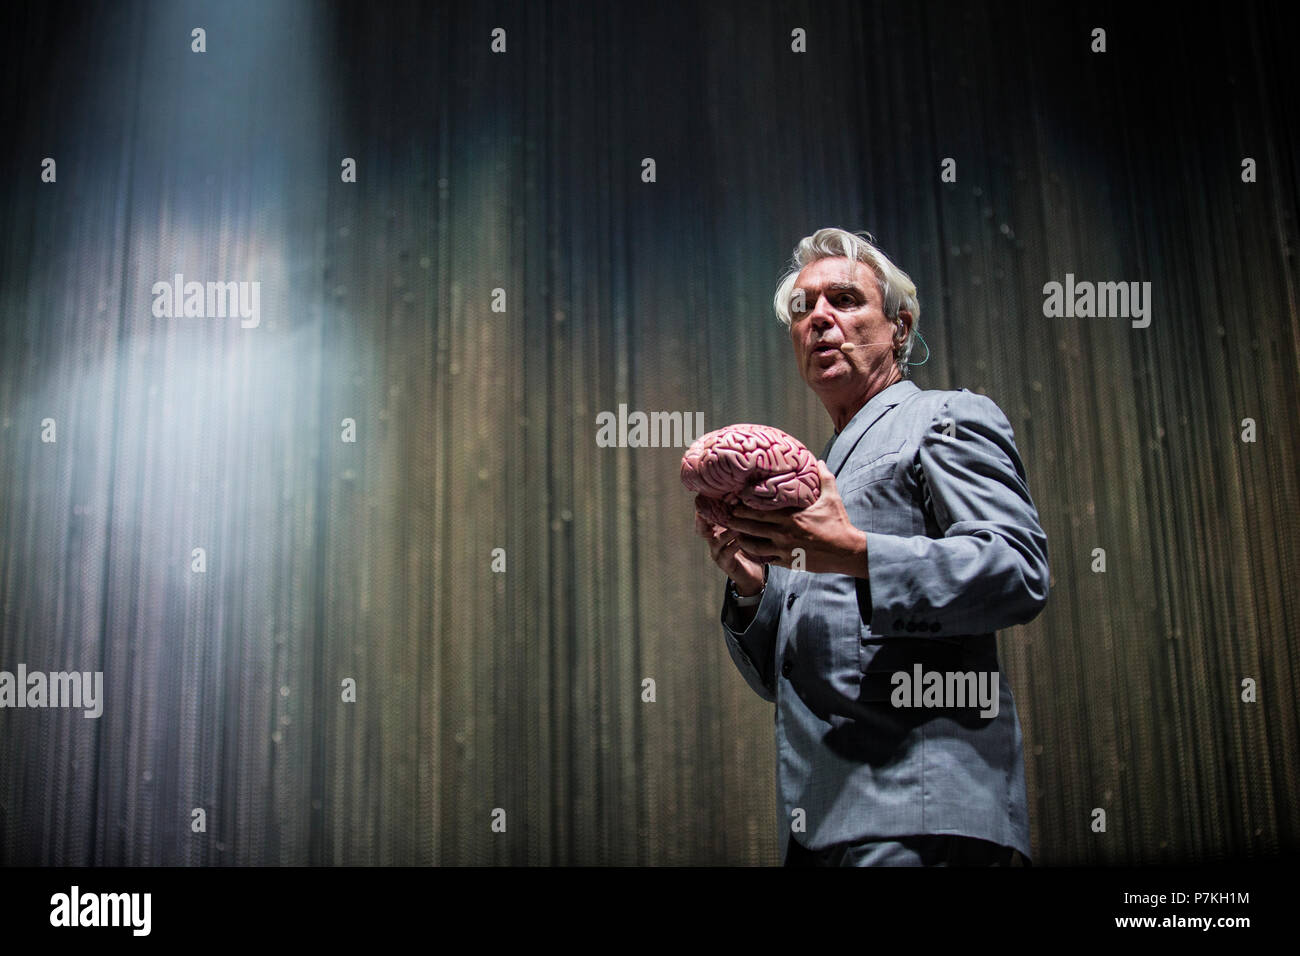 Denmark, Roskilde - July 7, 2018. The Scottish-American singer, songwriter and musician David Byrne performs a live concert during the Danish music festival Roskilde Festival 2018. (Photo credit: Gonzales Photo - Christian Hjorth). Credit: Gonzales Photo/Alamy Live News Stock Photo